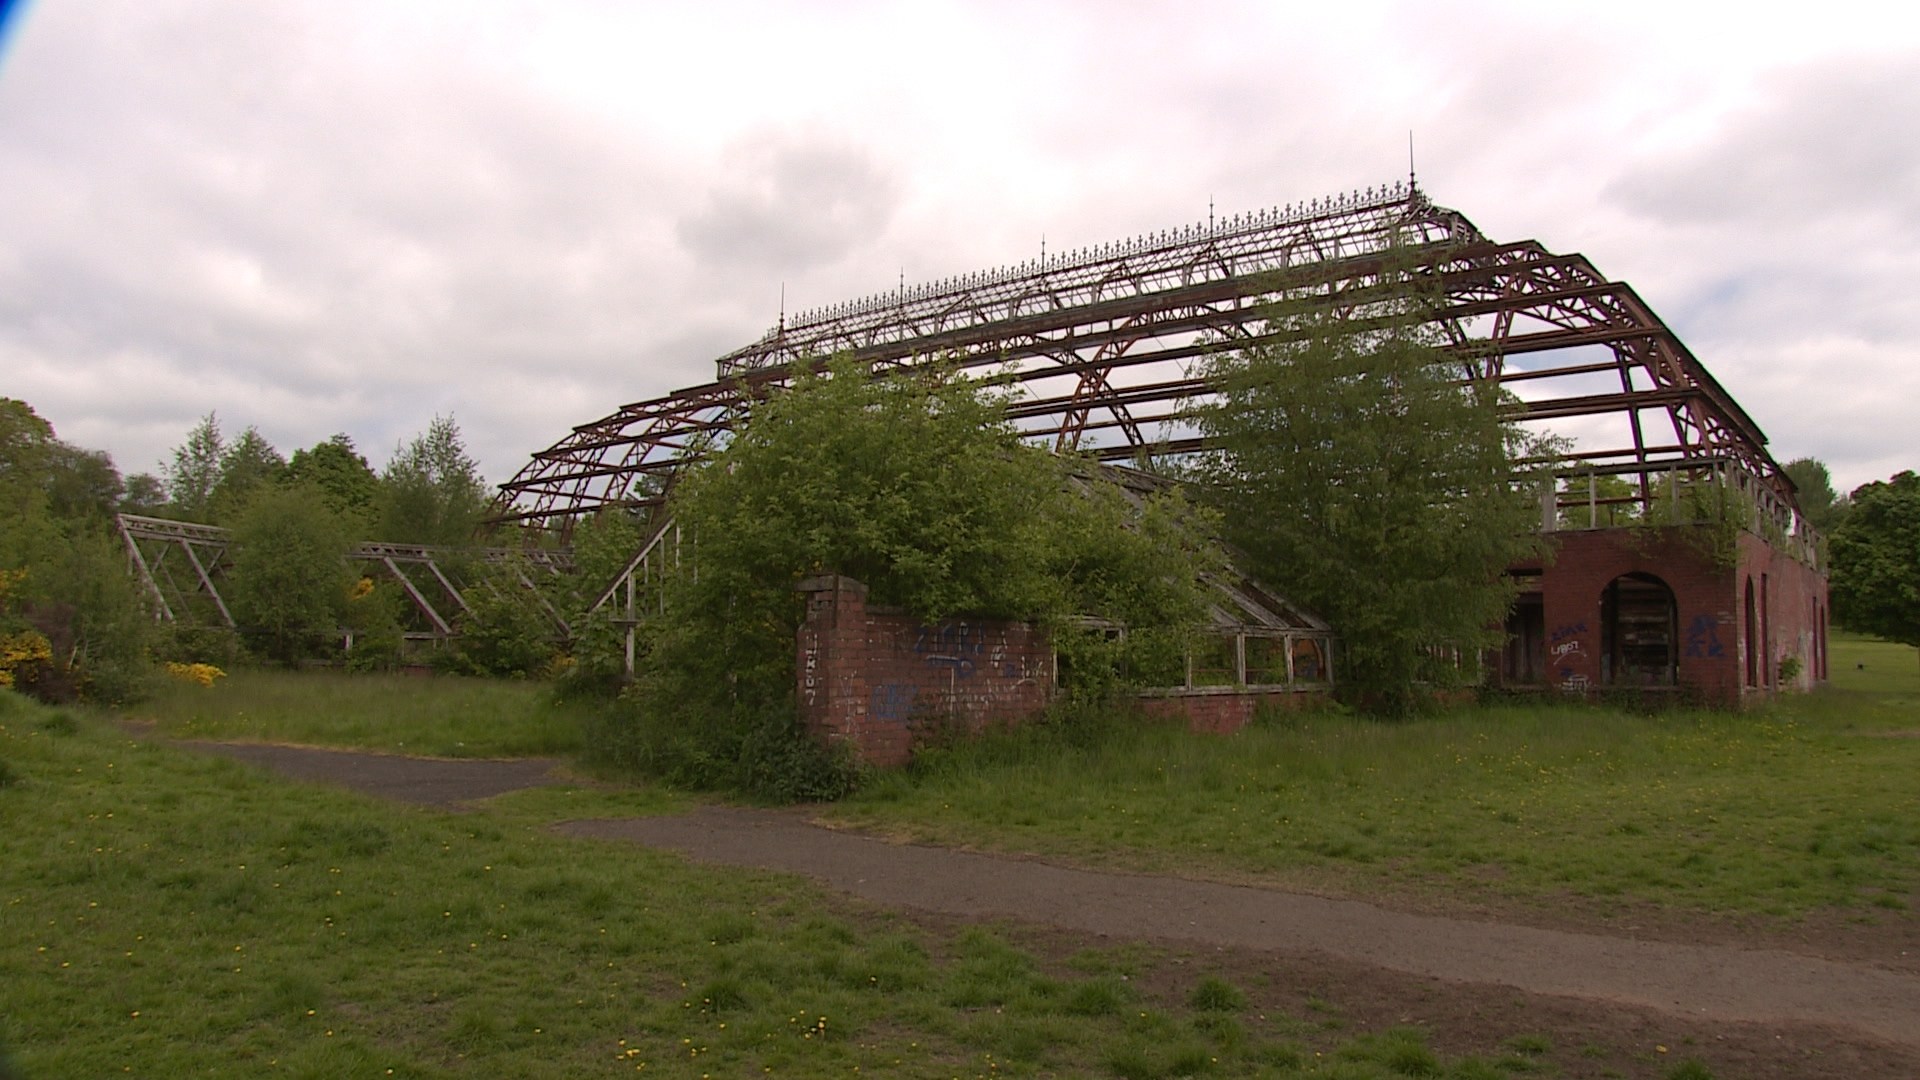 Springburn Winter Gardens closed from storm damage in 1983.